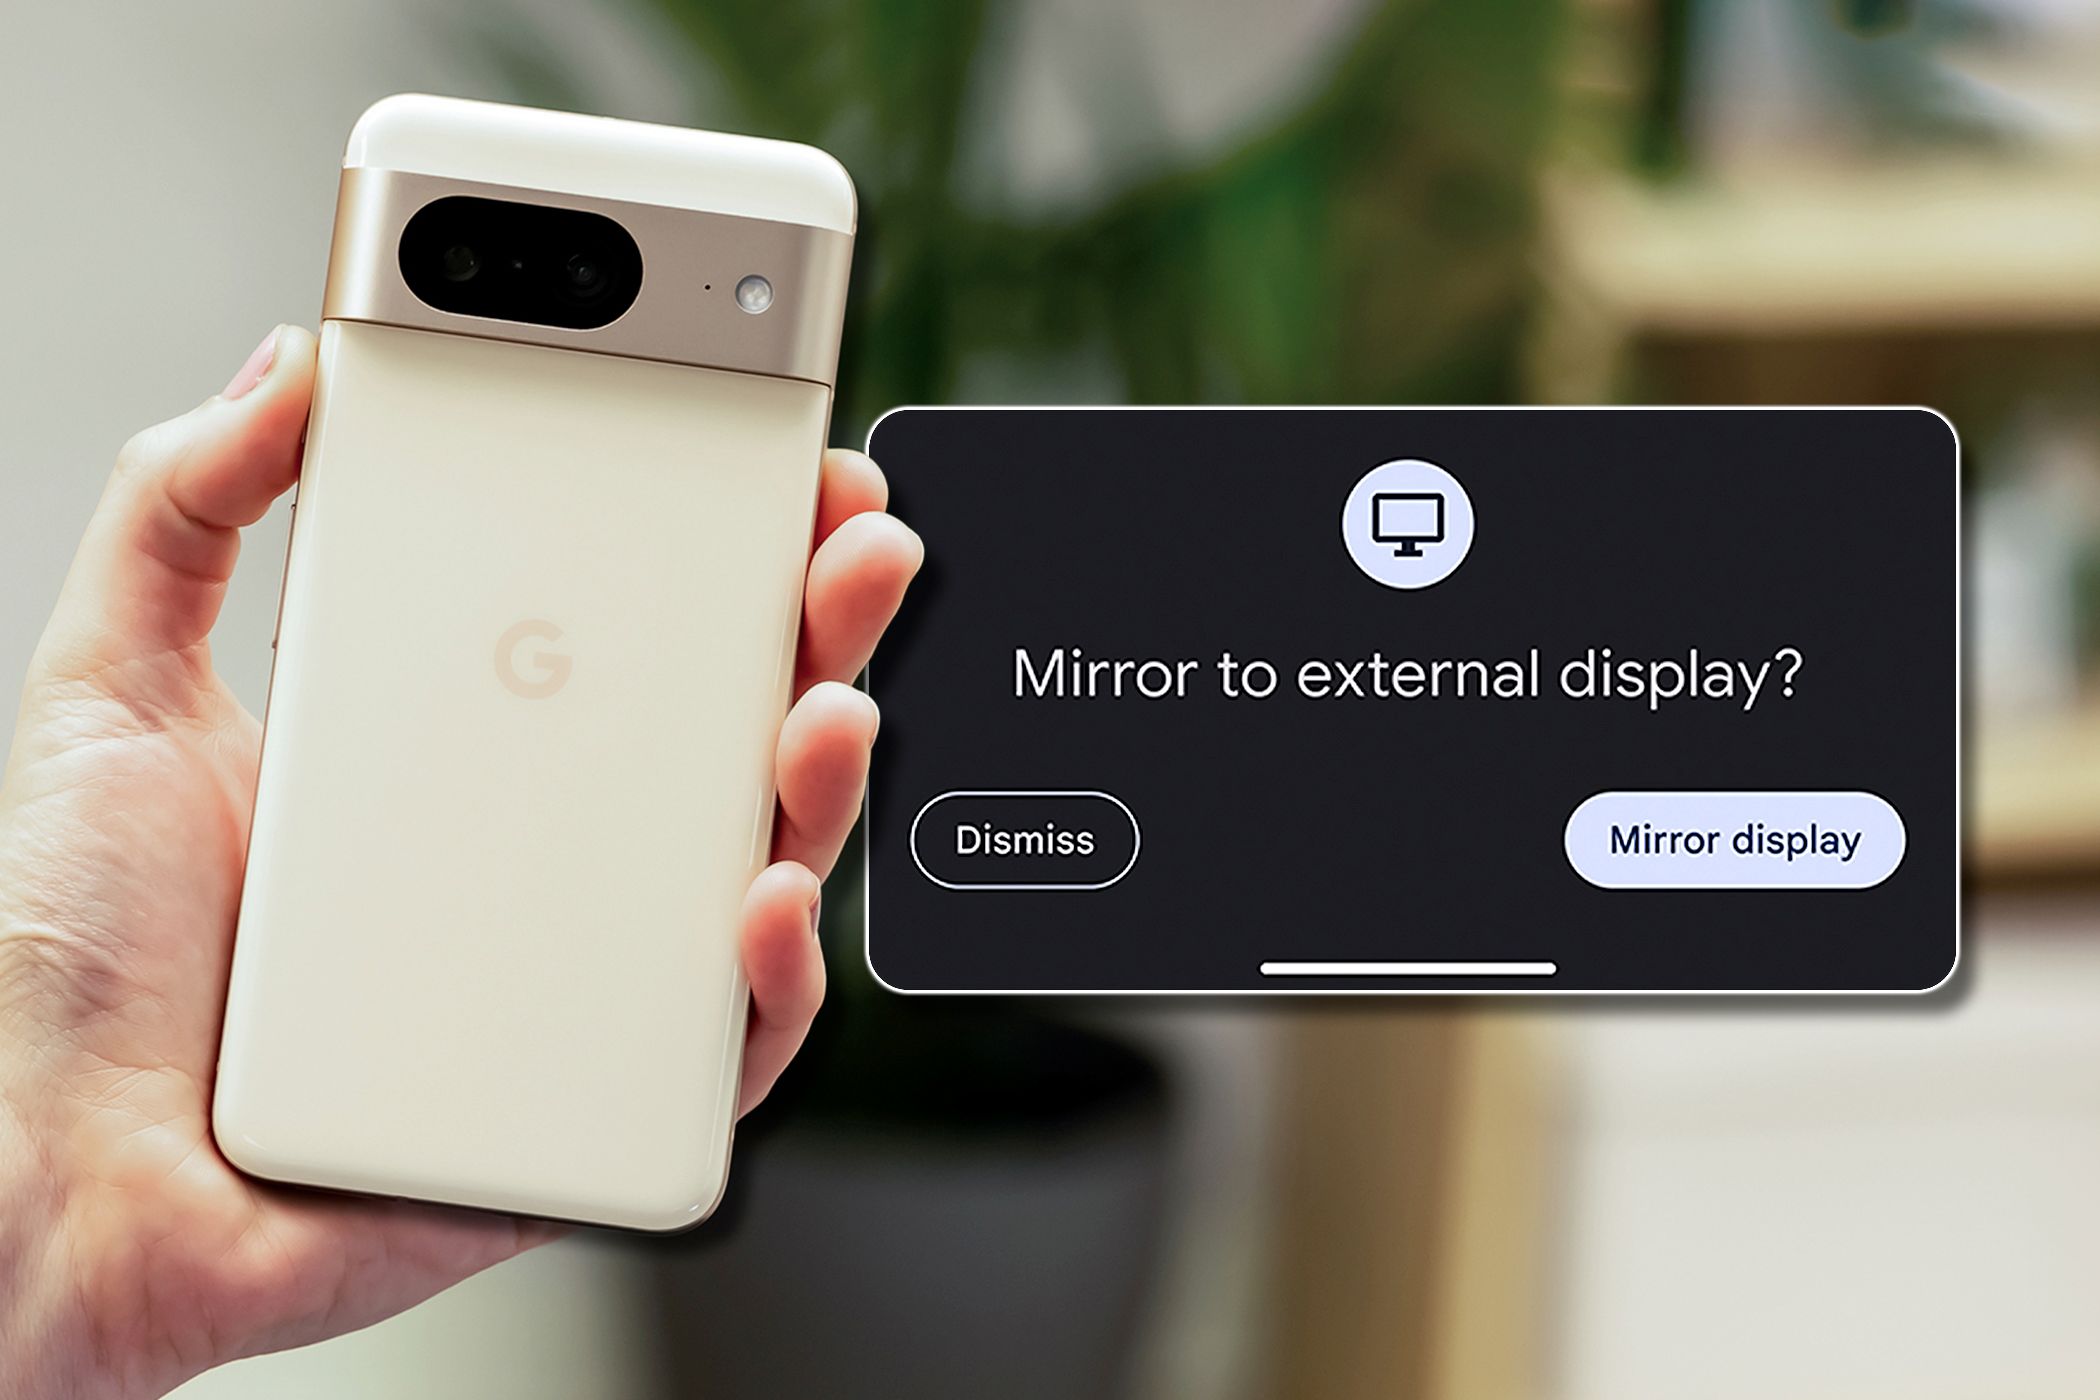 Someone holding a Pixel 7 smartphone with a prompt asking if the user wants to mirror to an external display.